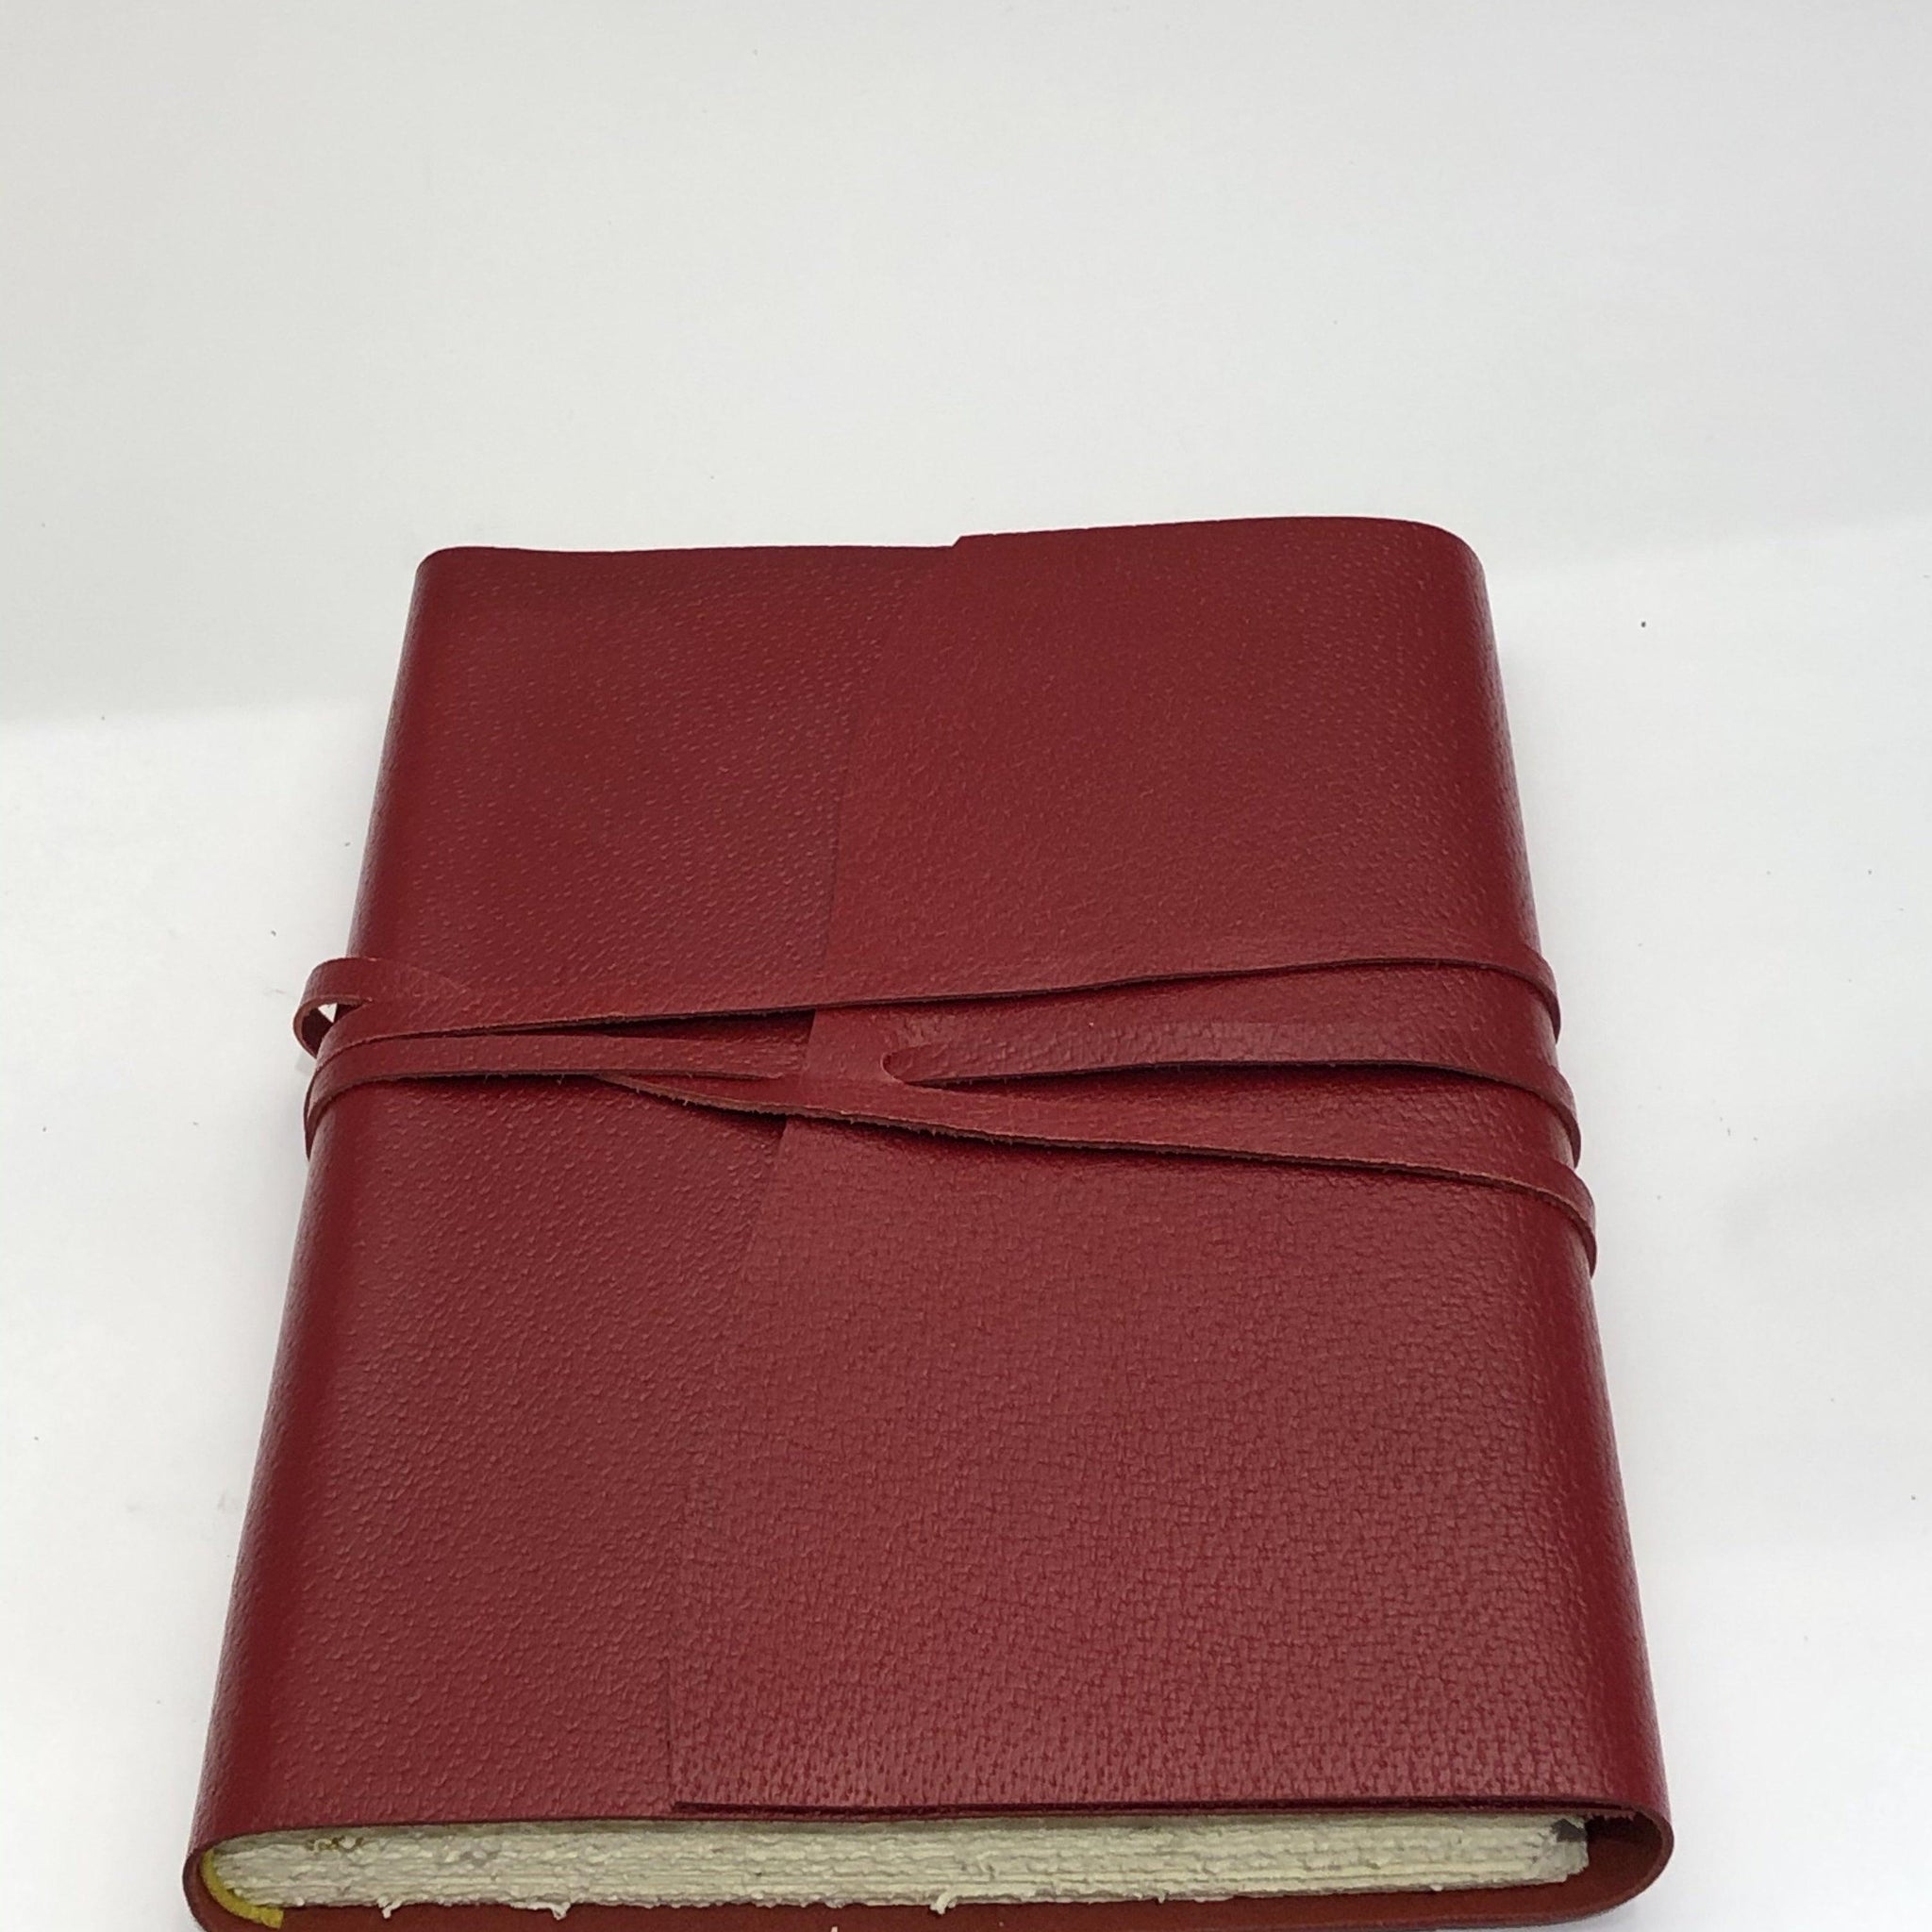 Wrap Leather Journal Medioevalis Oxblood Large - Handworks Nouveau Paperie